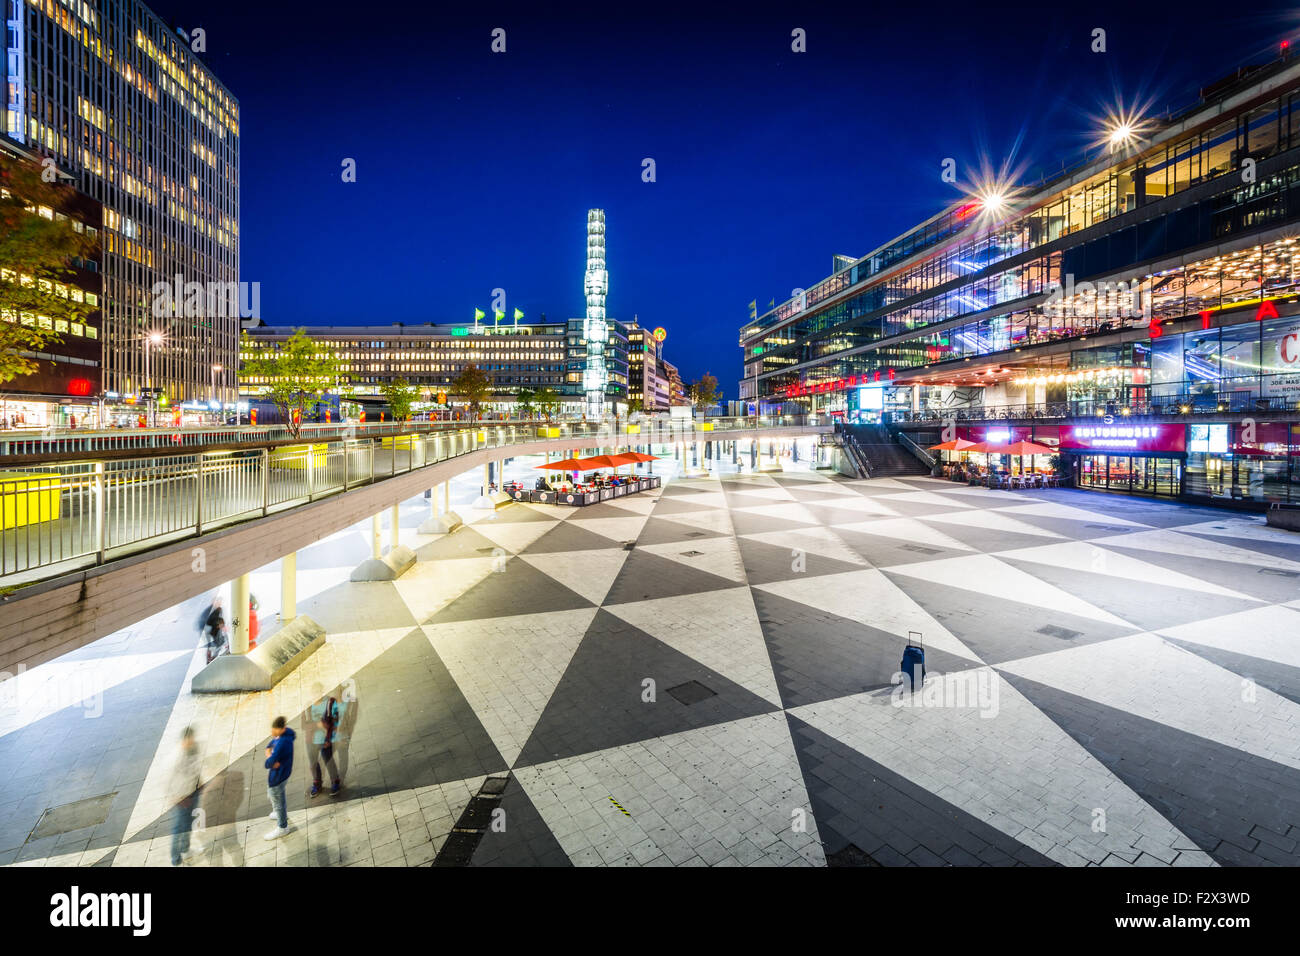 View of Sergels Torg at night, in Norrmalm, Stockholm, Sweden. Stock Photo